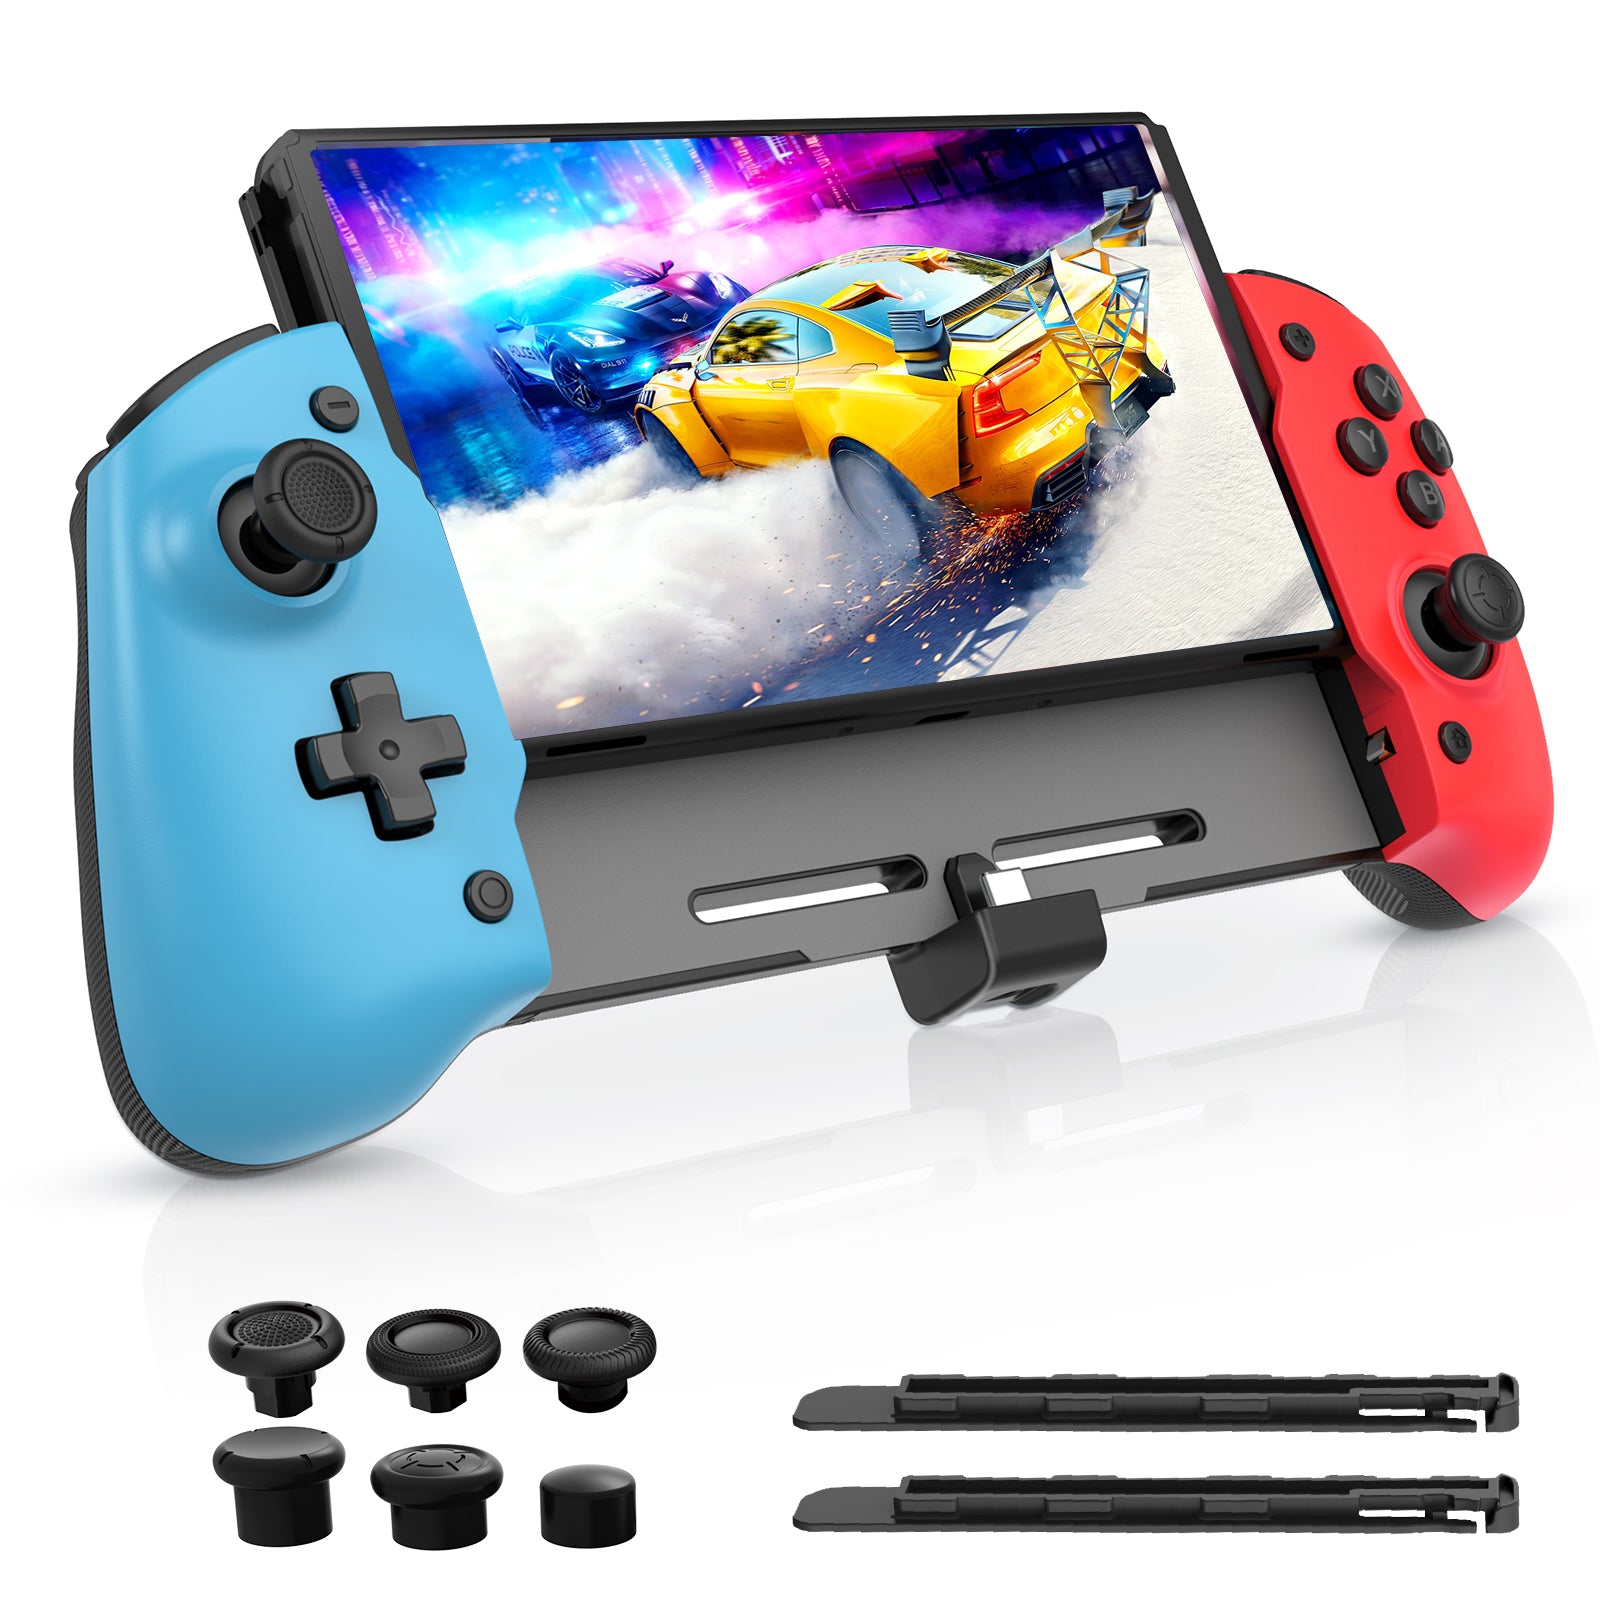 NexiGo Gripcon, designed for Nintendo Switch, with 6-Axis Gyro, Back Button Mapping (BLU-RED)